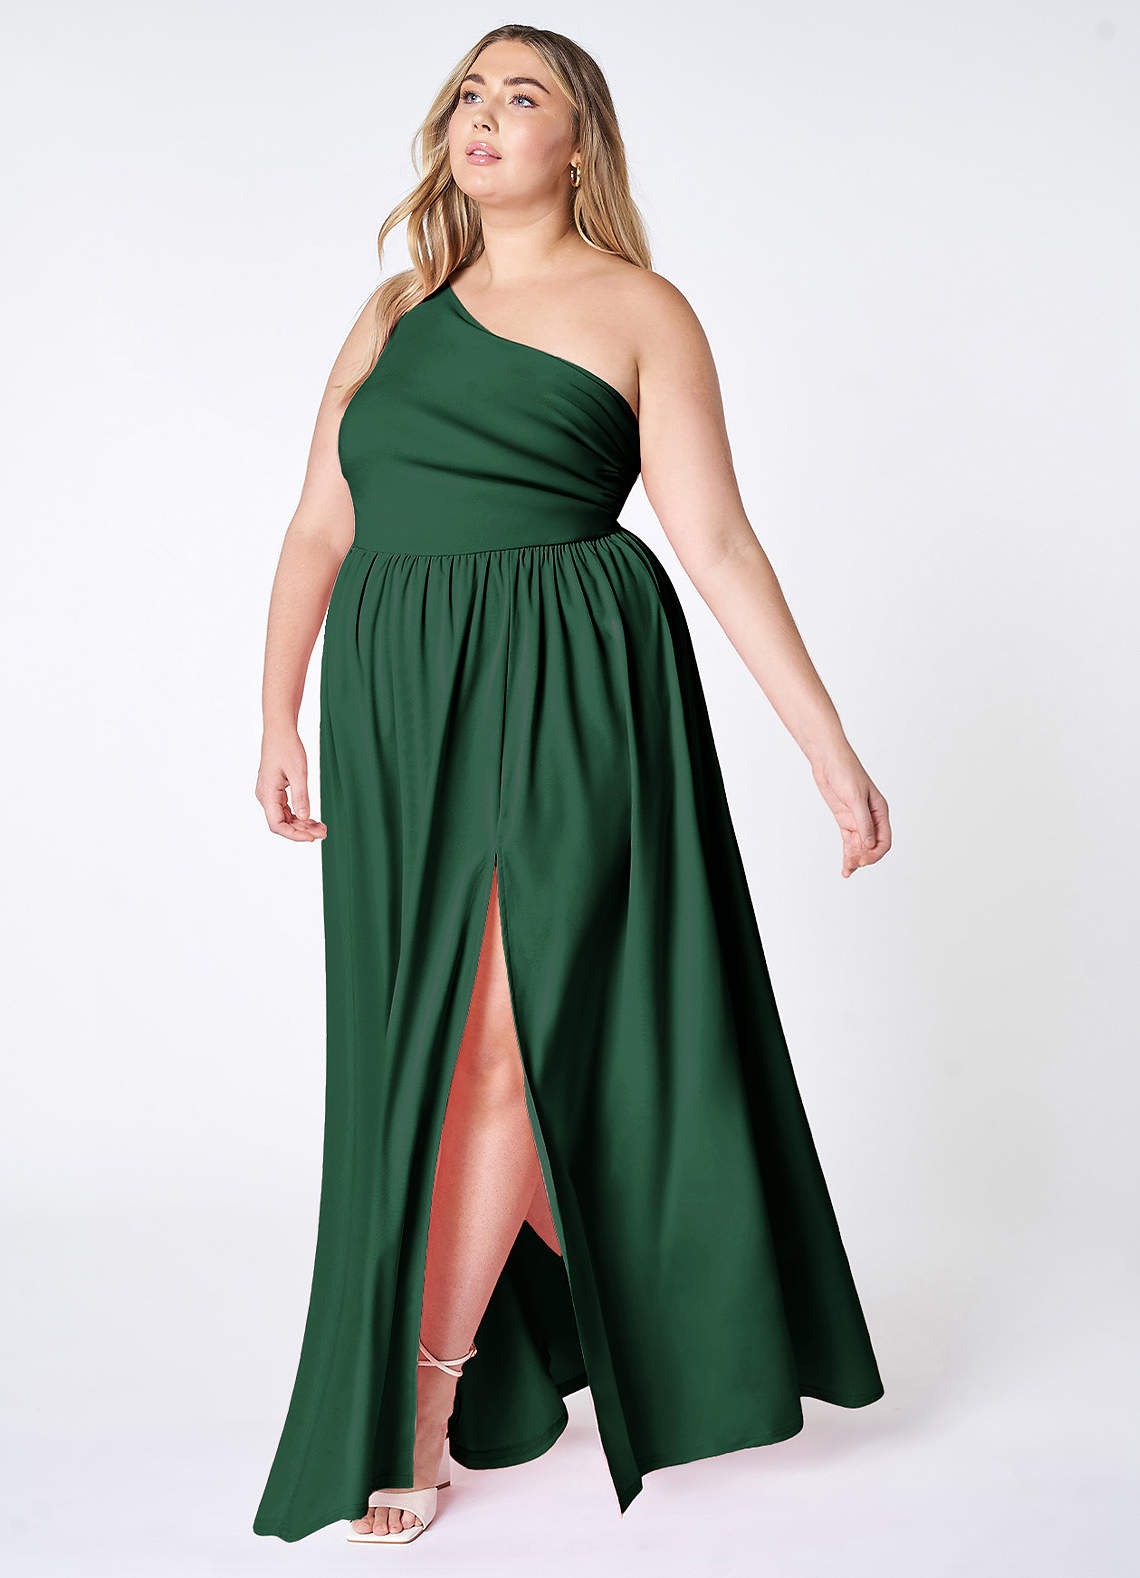 On The Guest List Dark Emerald One-Shoulder Maxi Dress image1